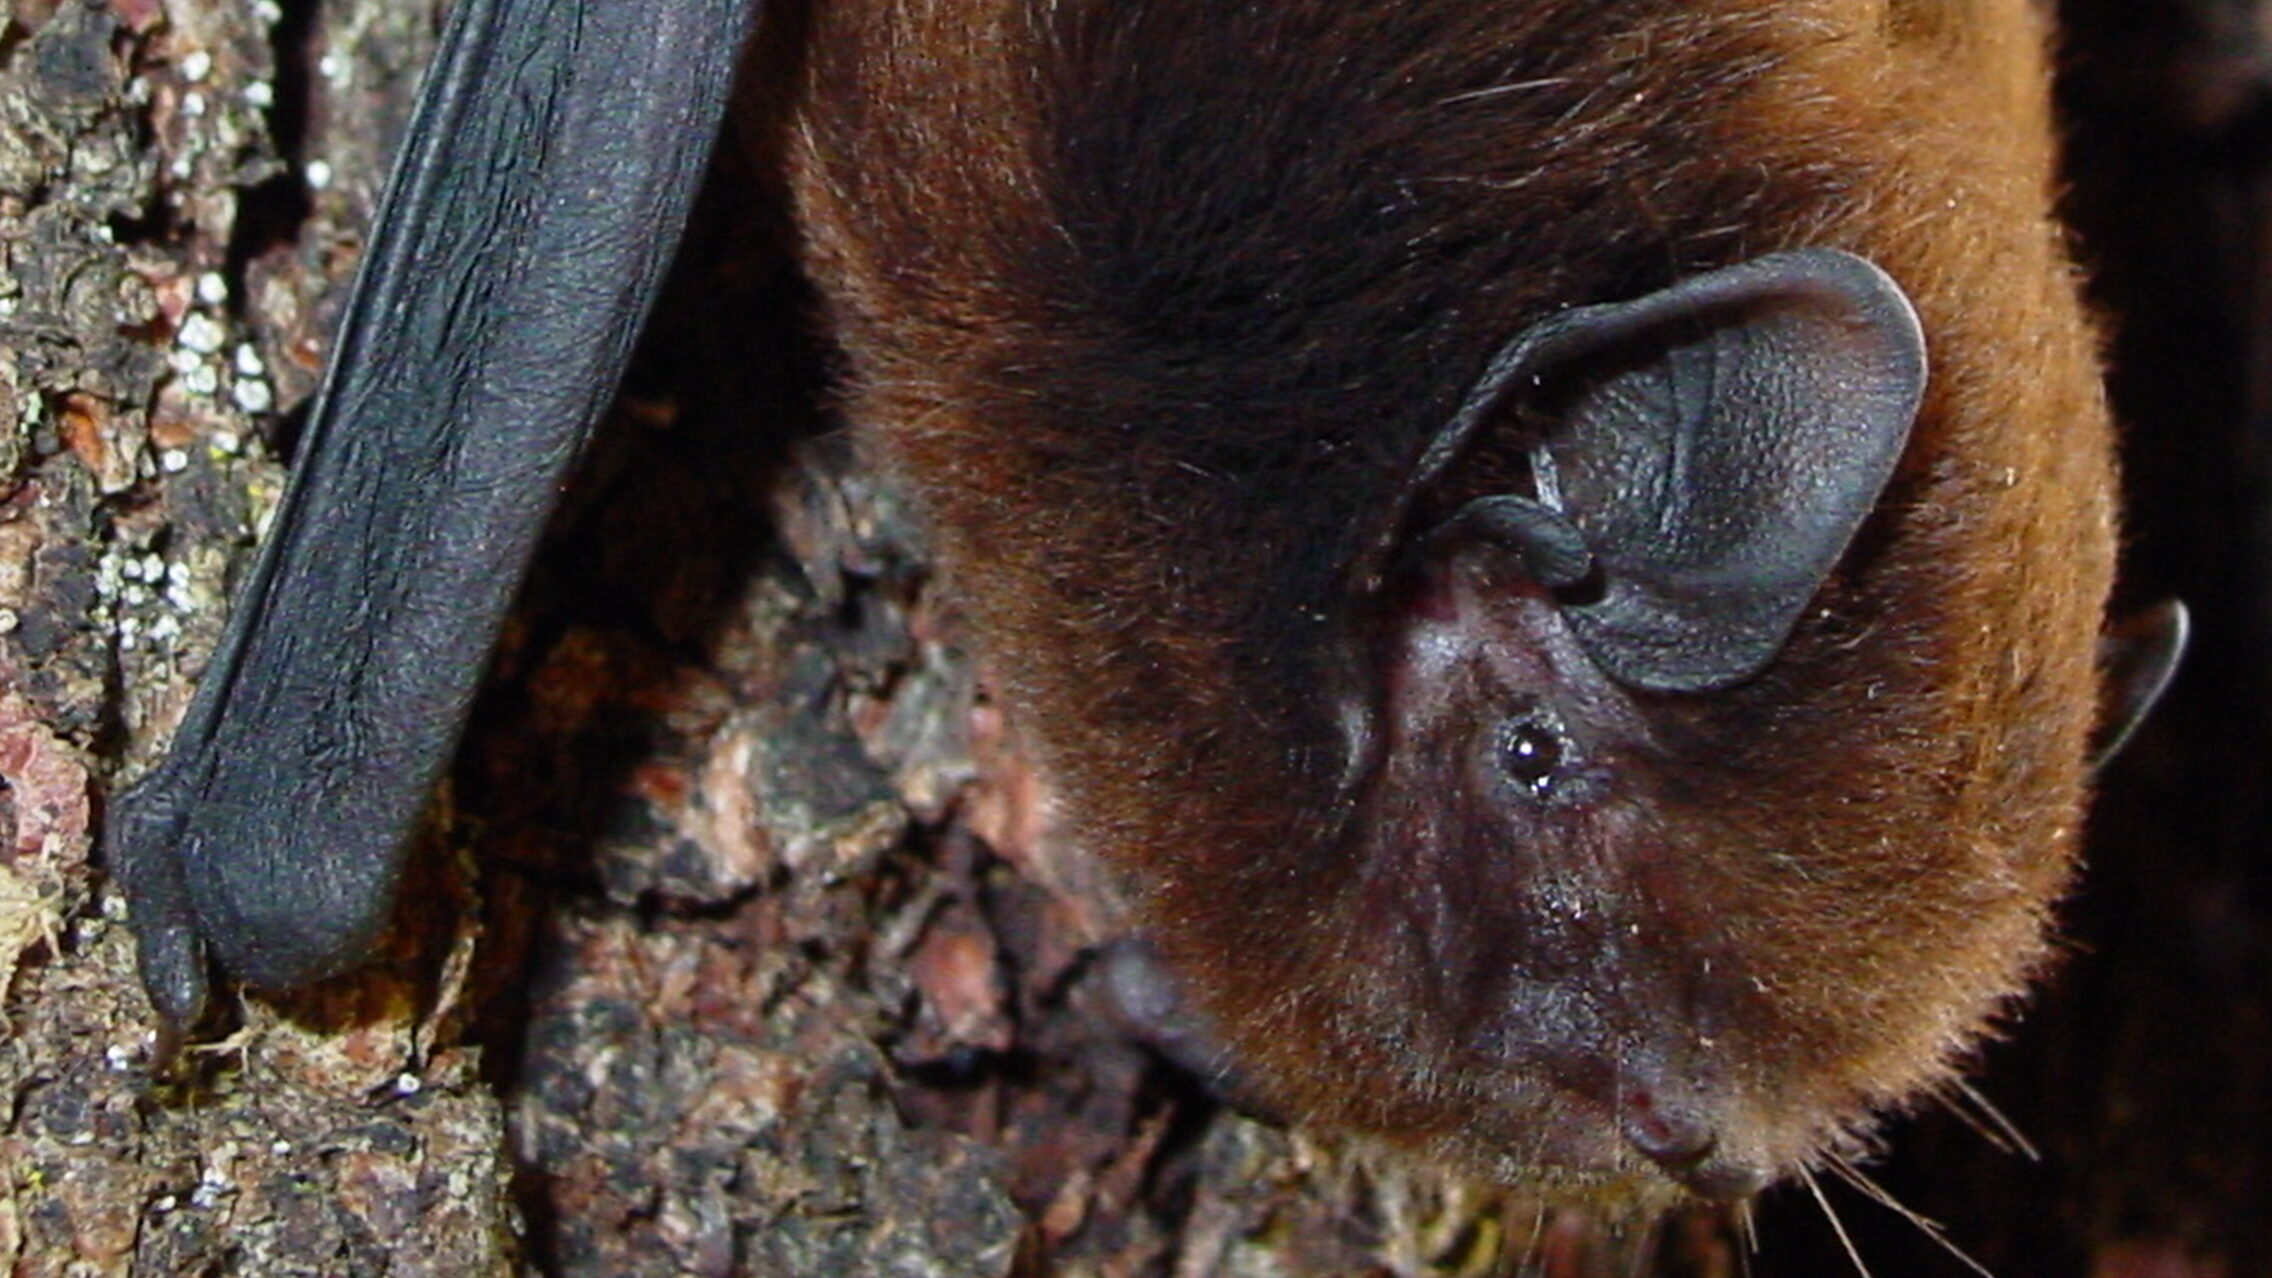 Close up of long-tailed bat on tree trunk